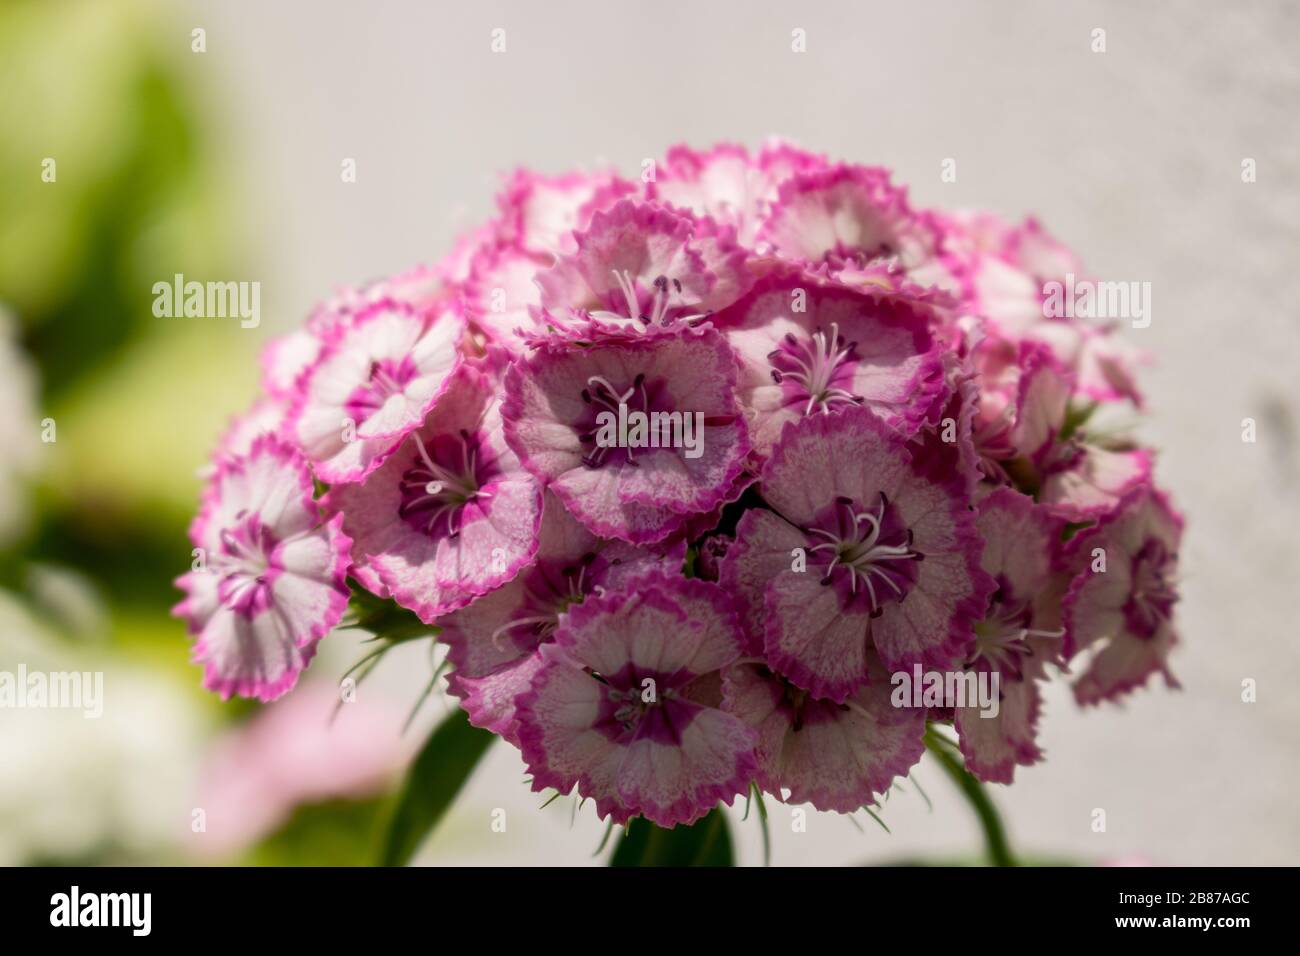 forget me pink flowers with blurred green leaf background Stock Photo